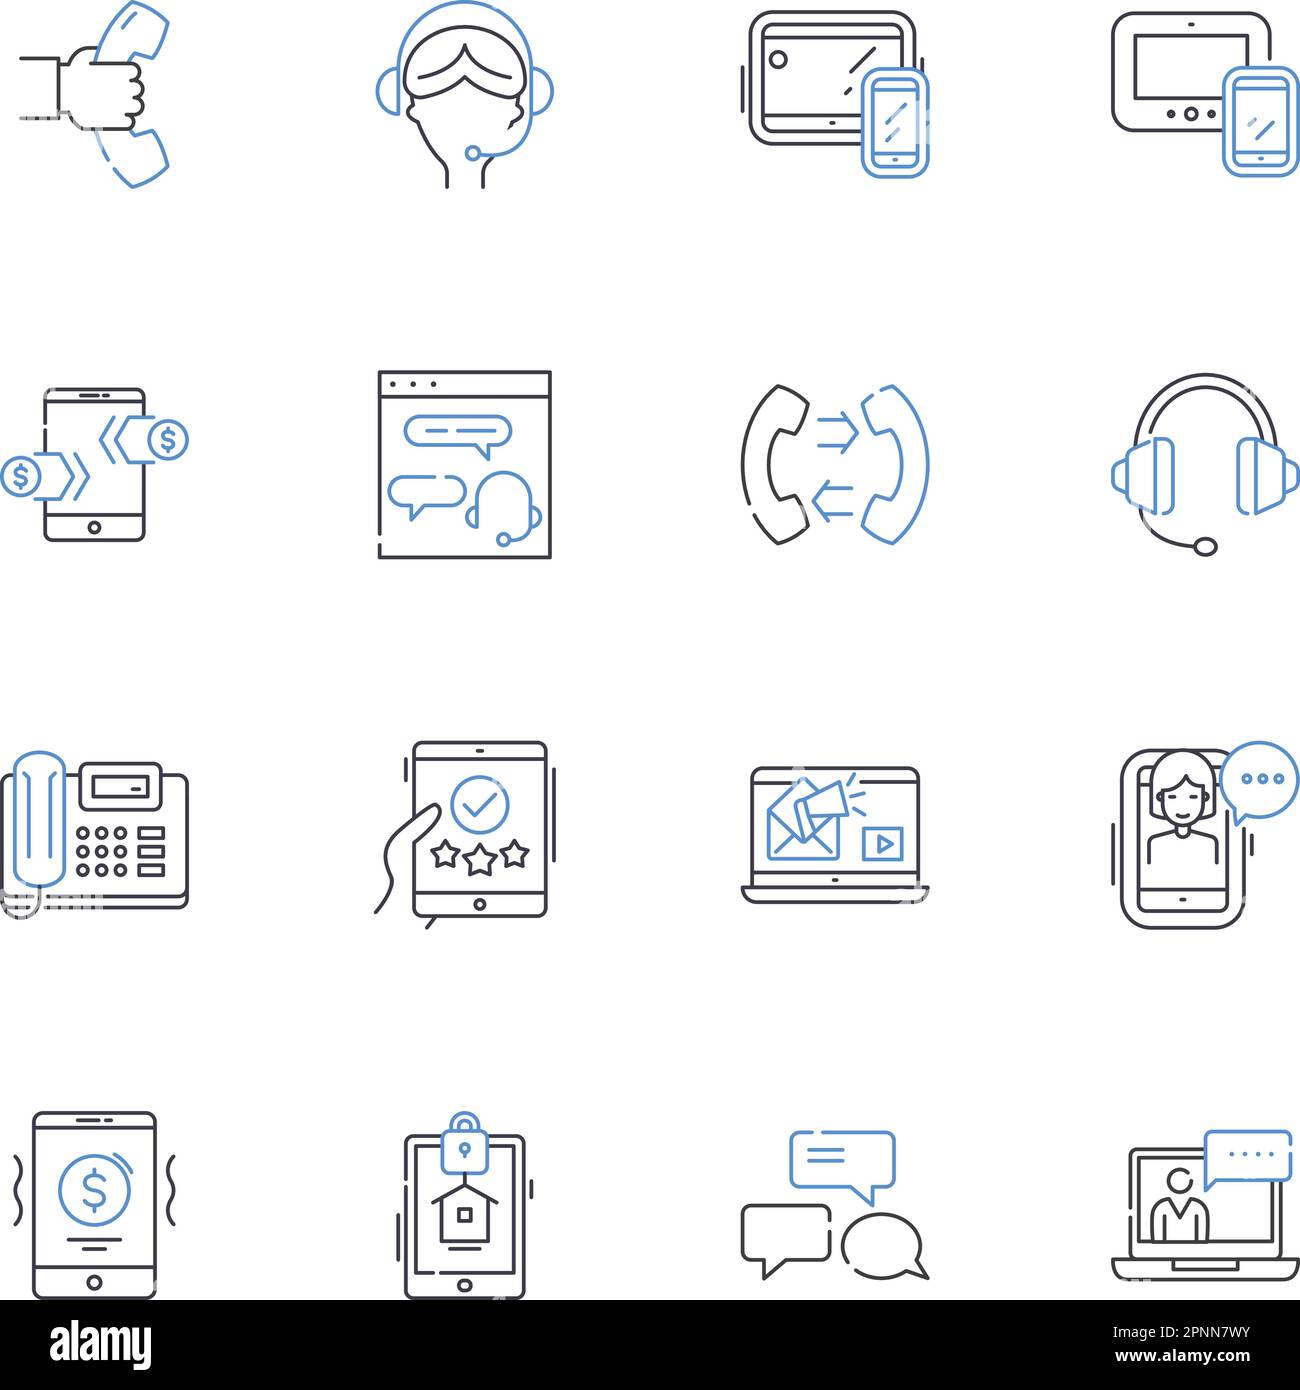 Windows line icons collection. Operating-system, Interface, Upgrade, Update, Compatibility, Desktop, Start-menu vector and linear illustration. File Stock Vector